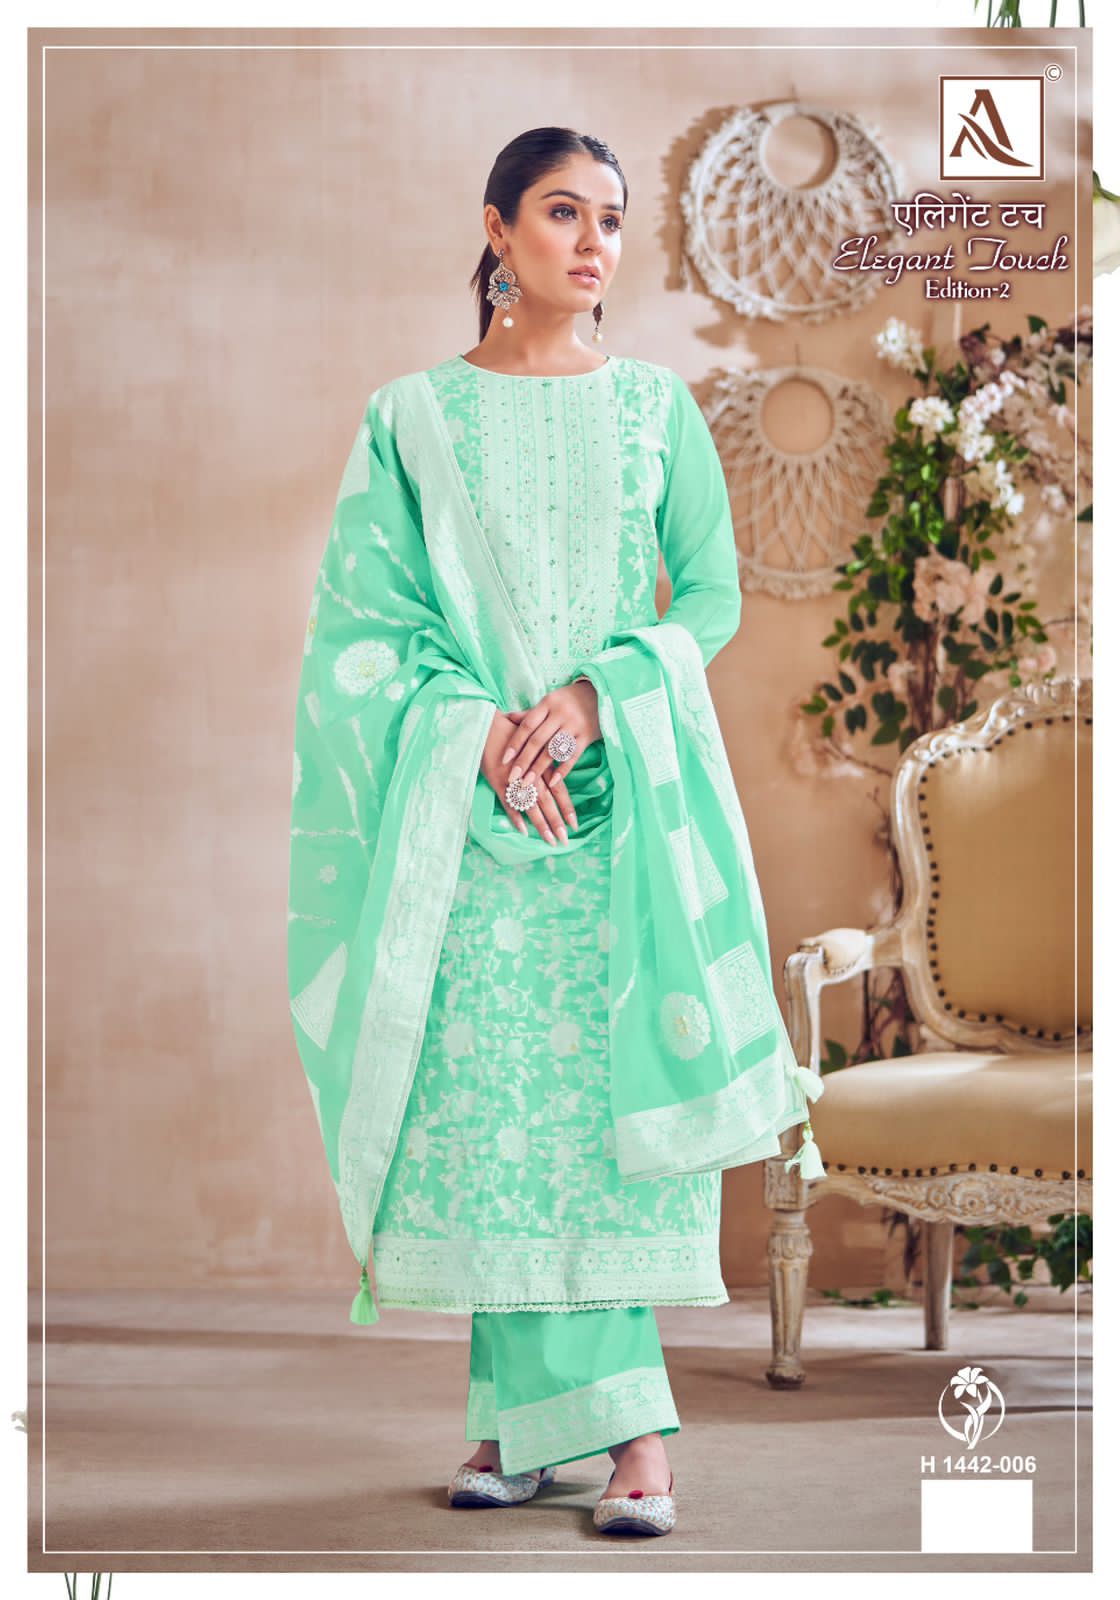 Alok Elegant Touch Vol 2 collection 2